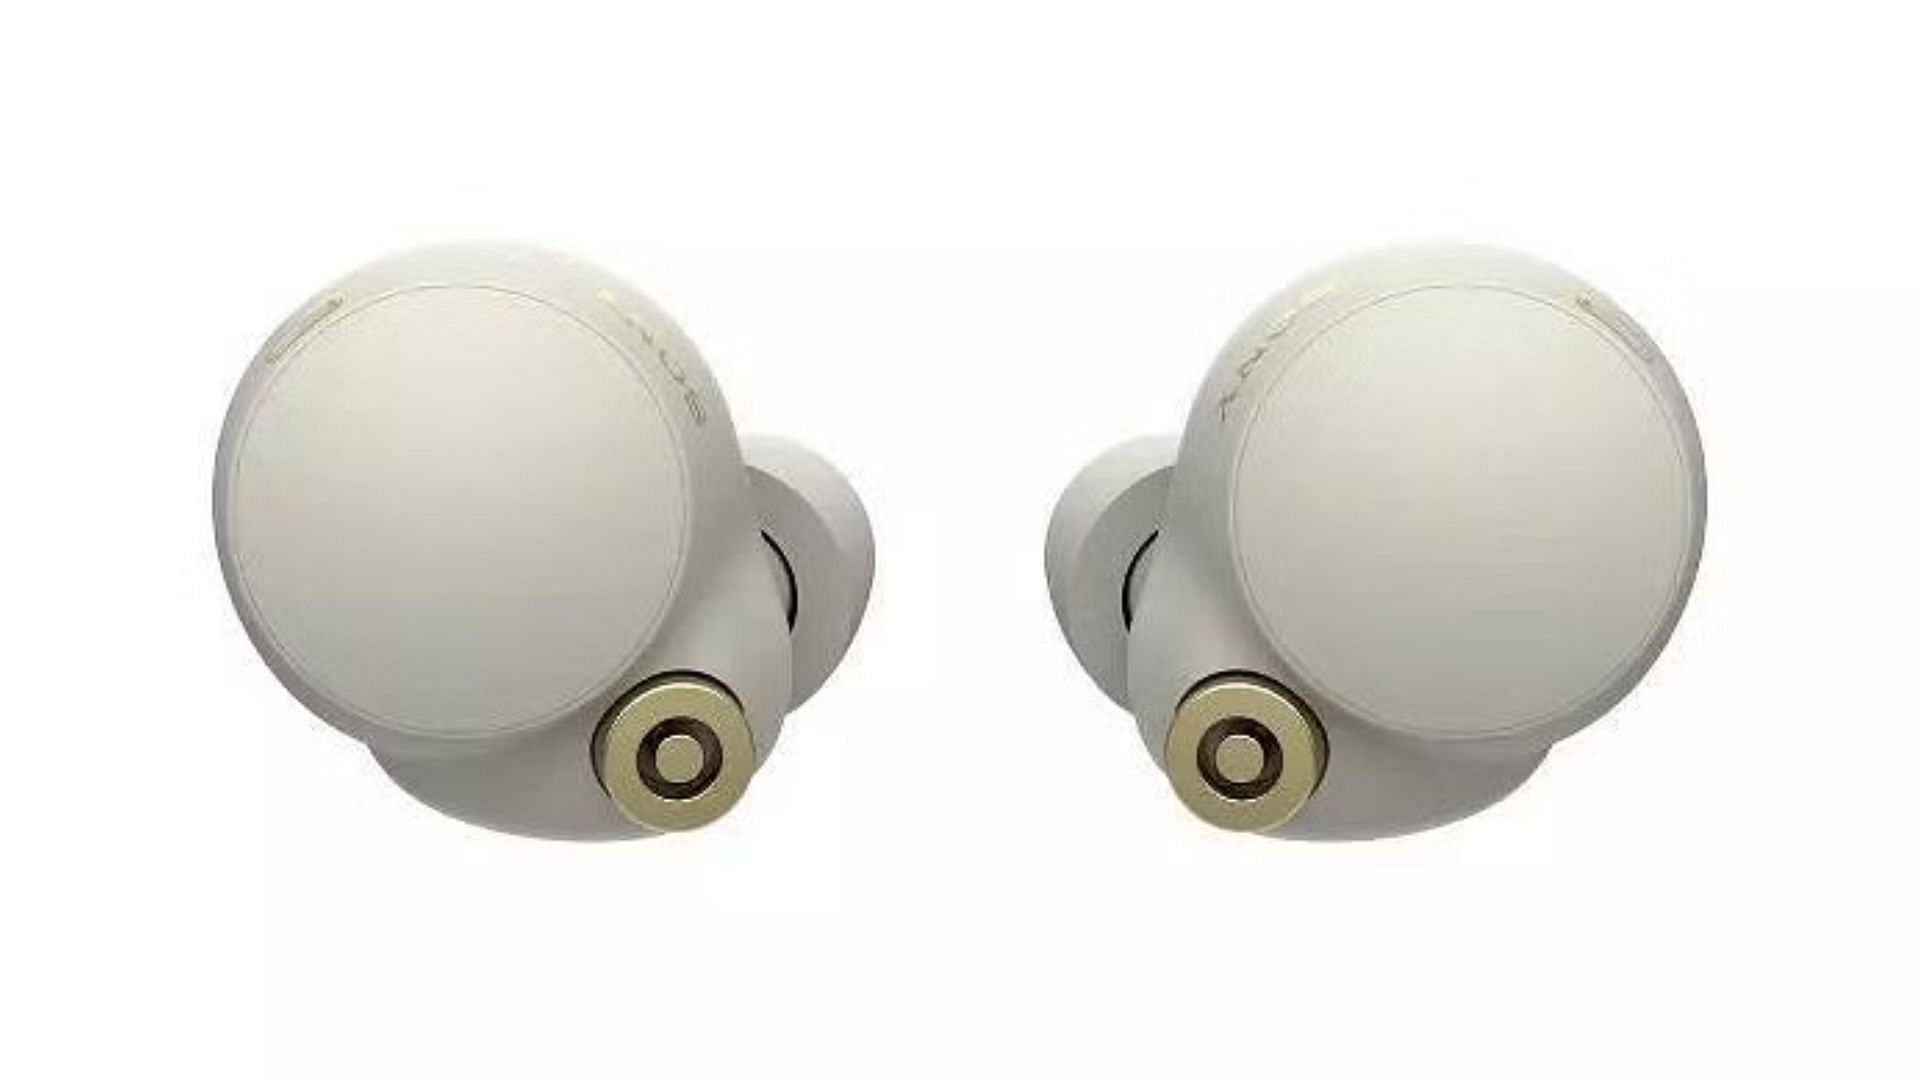 The Sony Noise-Cancelling True Wireless Bluetooth Earbuds - WF-1000XM4 (Image via Target)